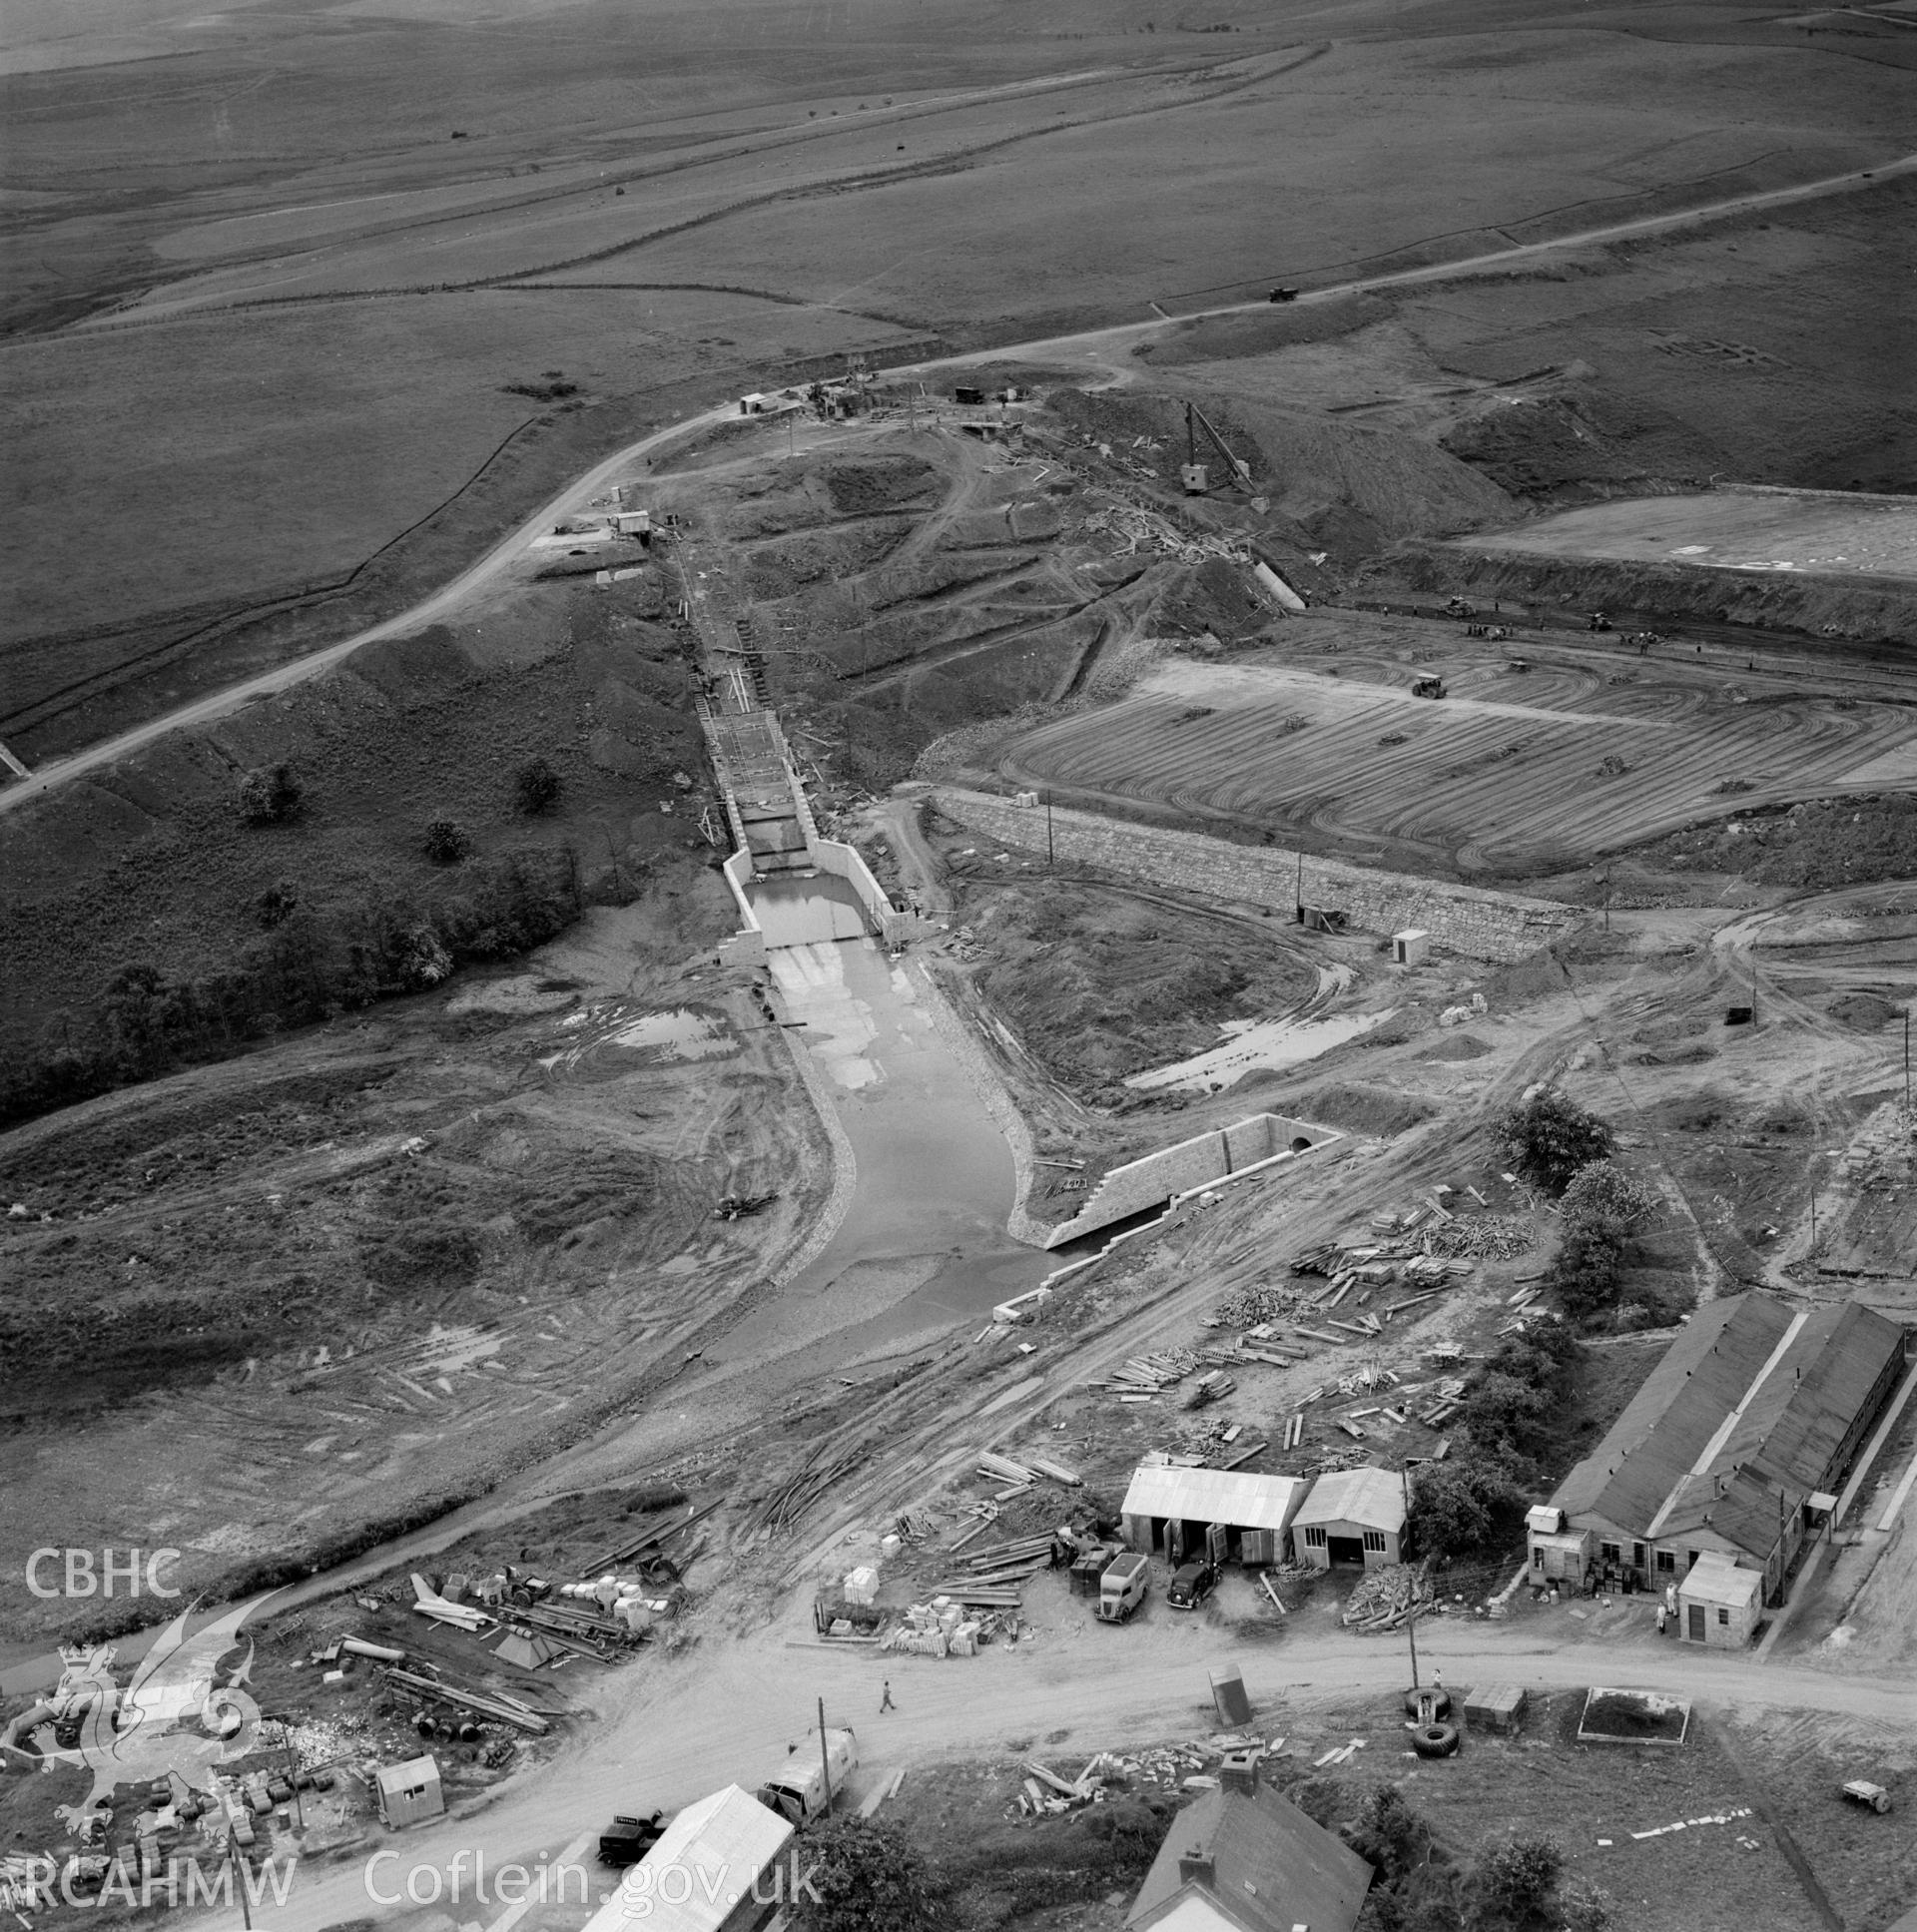 View of site during the construction of Usk Reservoir